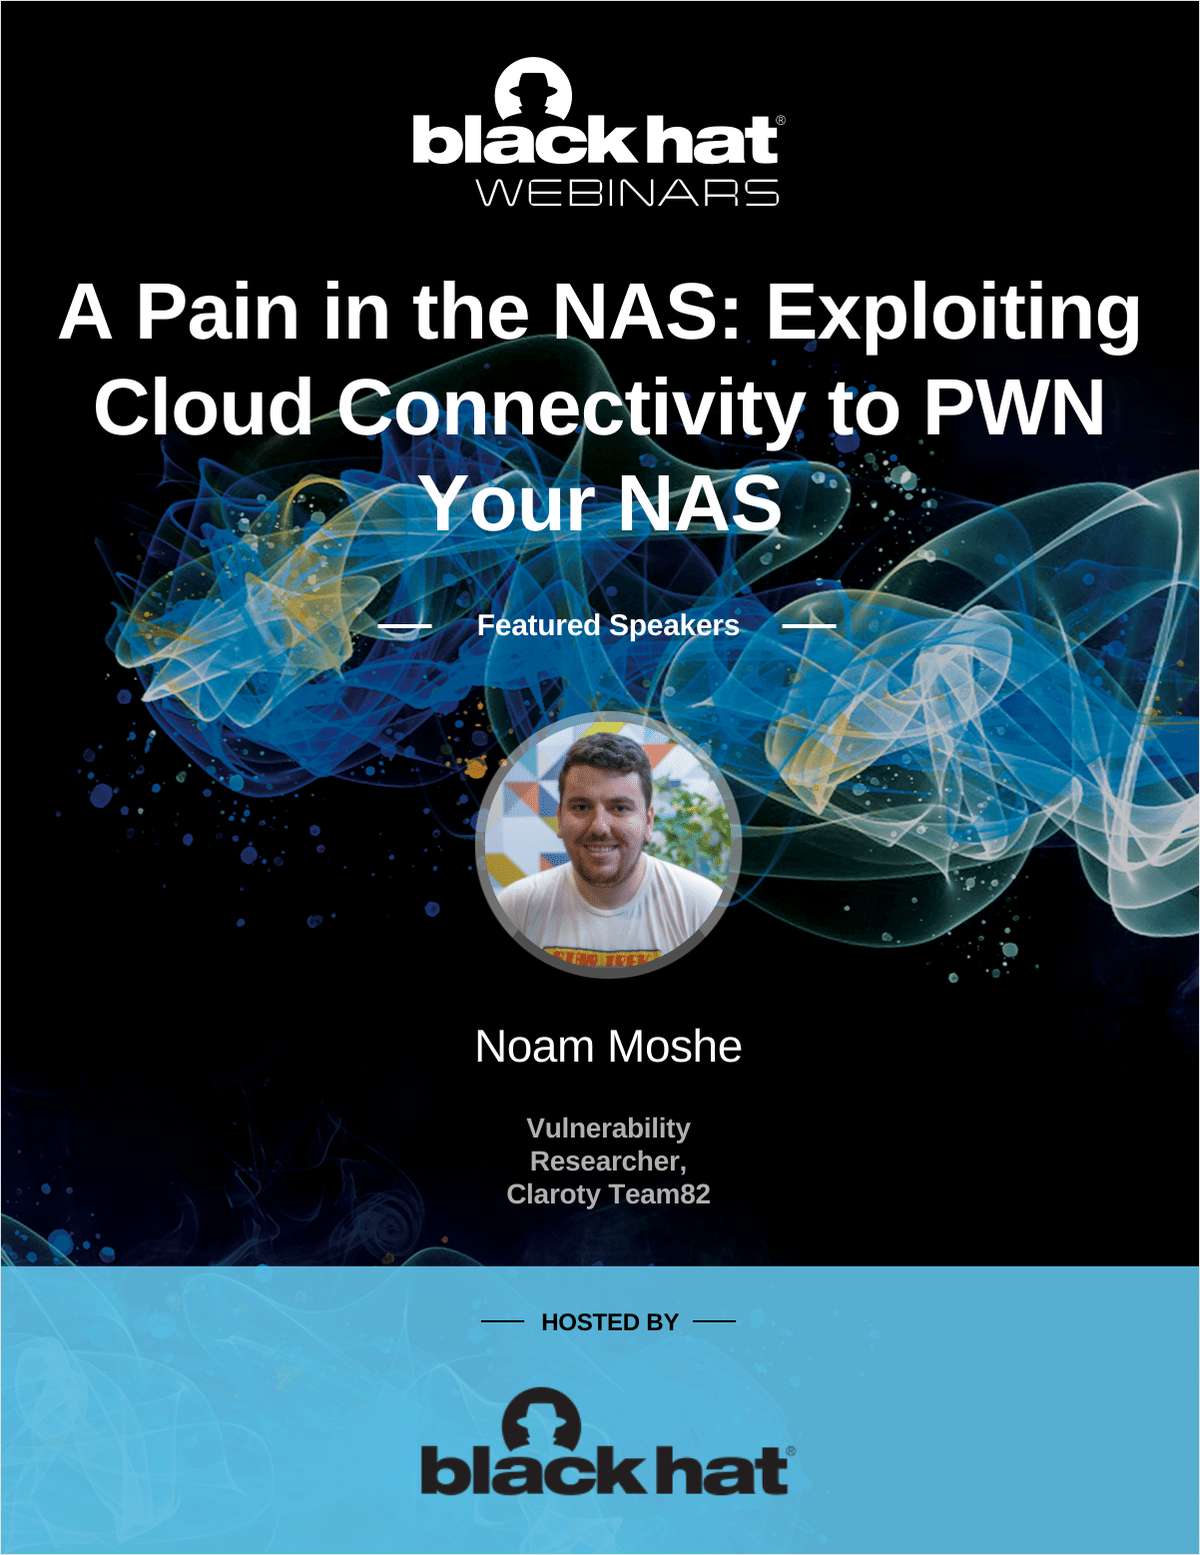 A Pain in the NAS: Exploiting Cloud Connectivity to PWN Your NAS